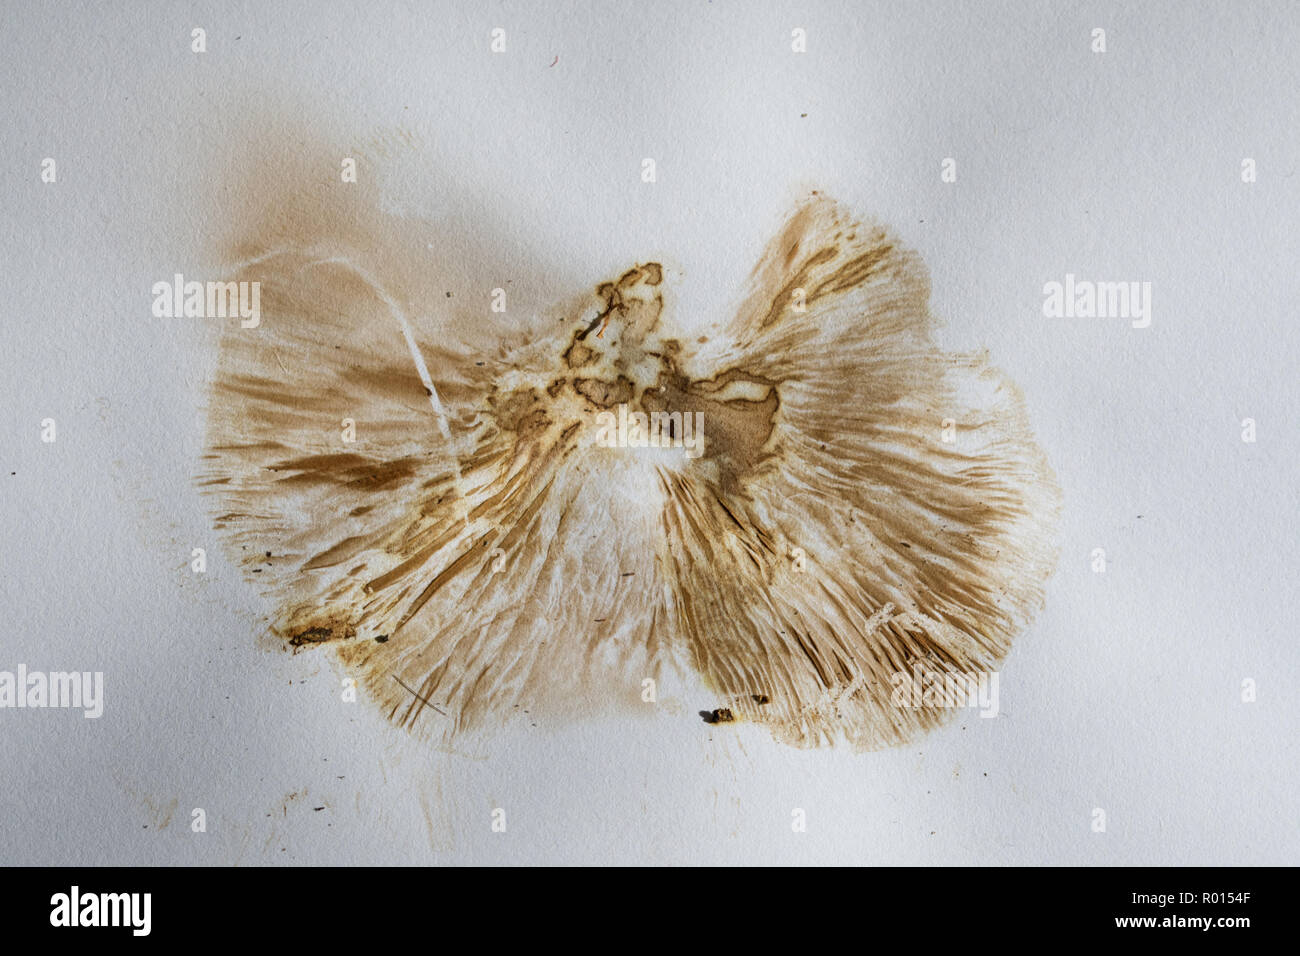 Spore pattern from a toadstool on a sheet of white paper. The colour of spores deposited by fungi can aid fungal species identification Stock Photo